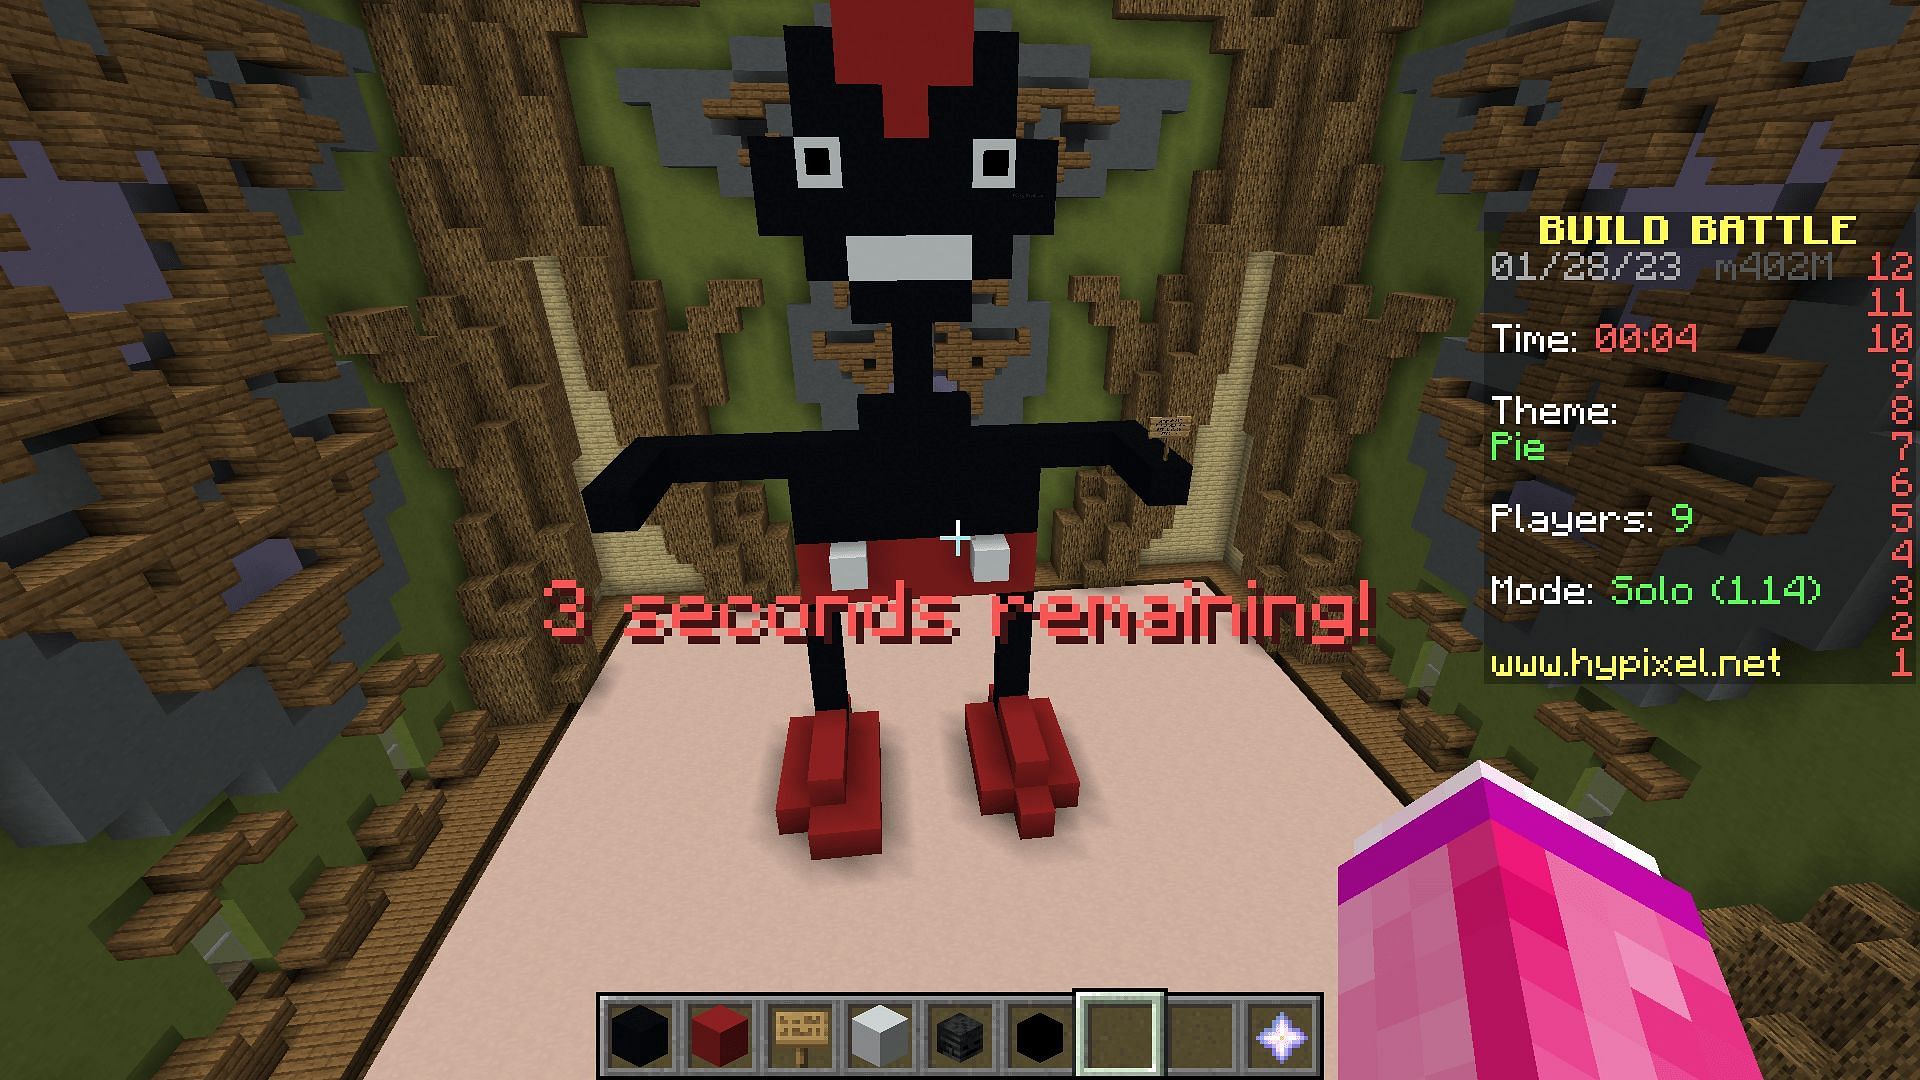 This Minecraft sever has gone really weird